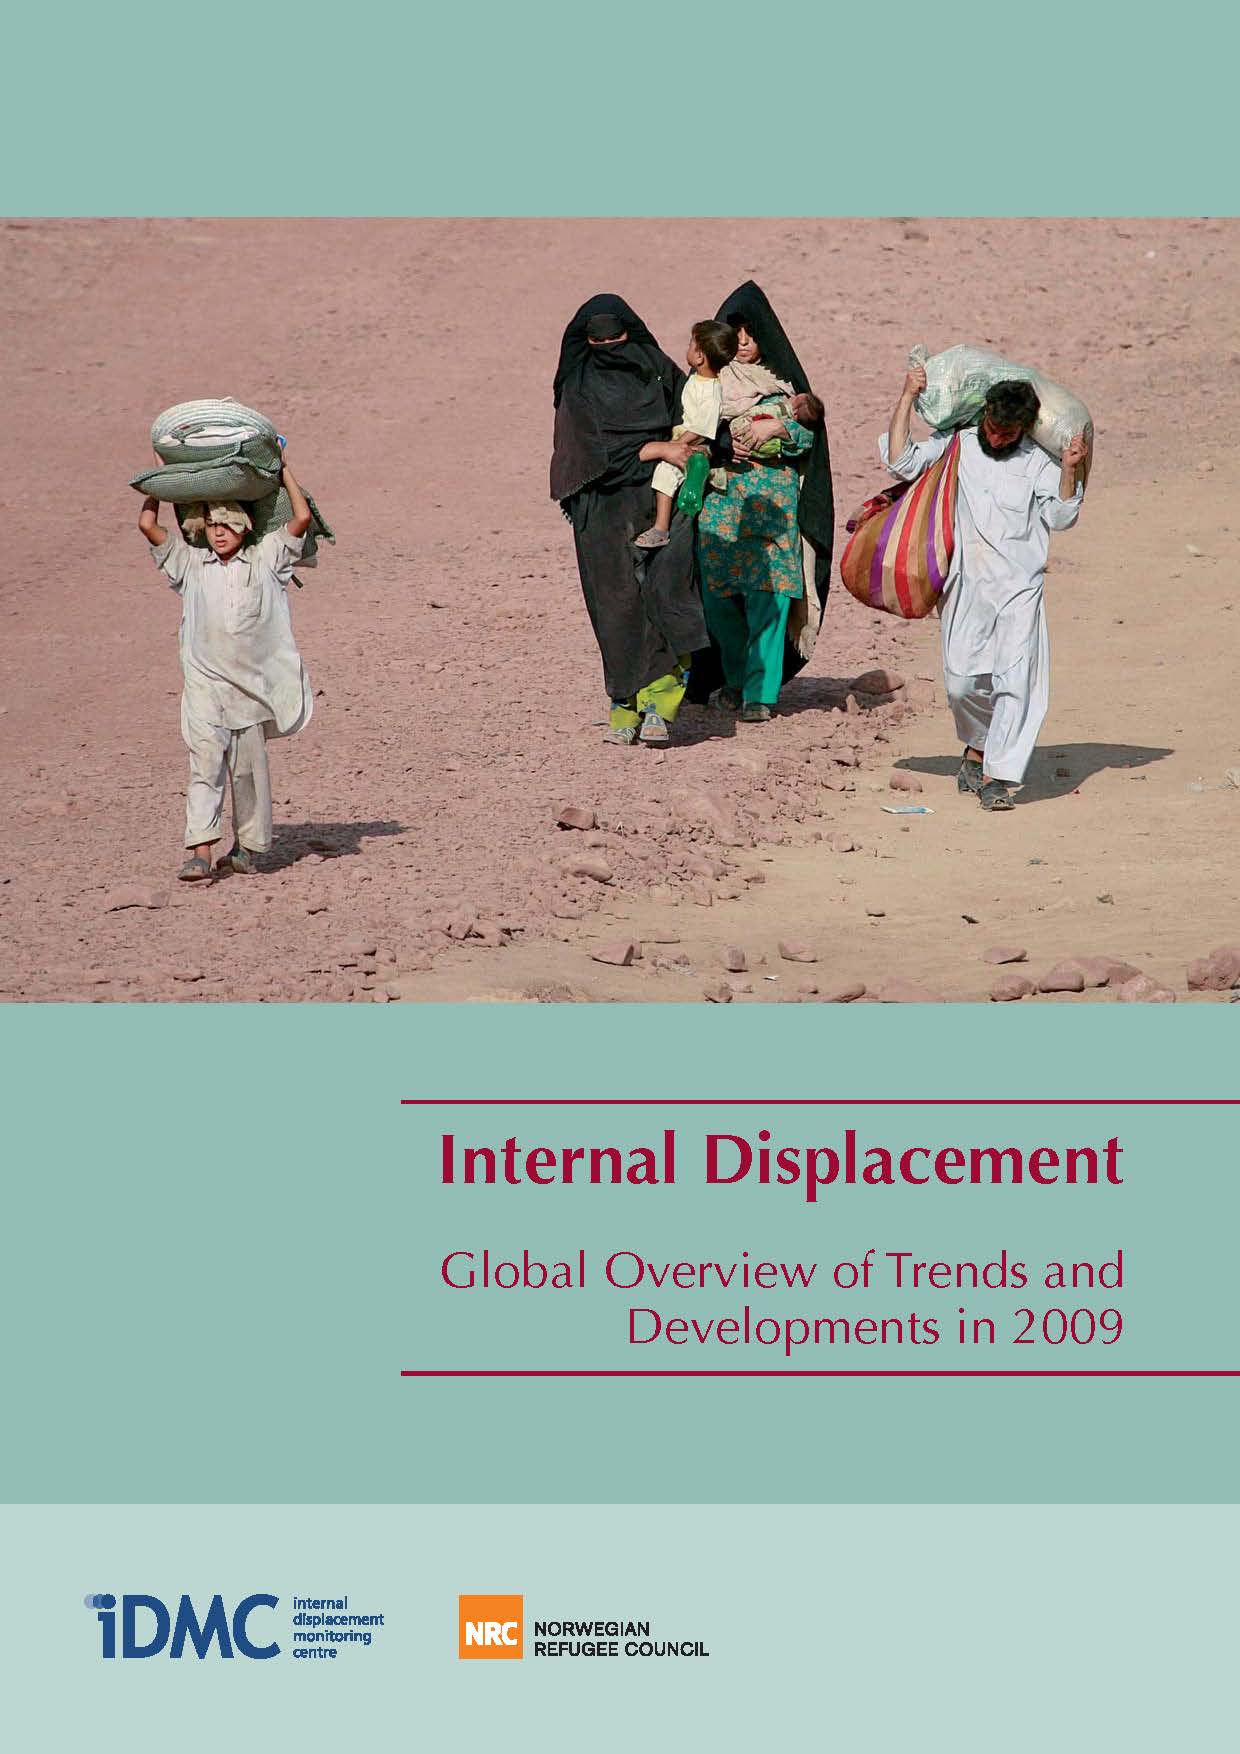 Internal Displacement: Global Overview of Trends and Developments in 2009